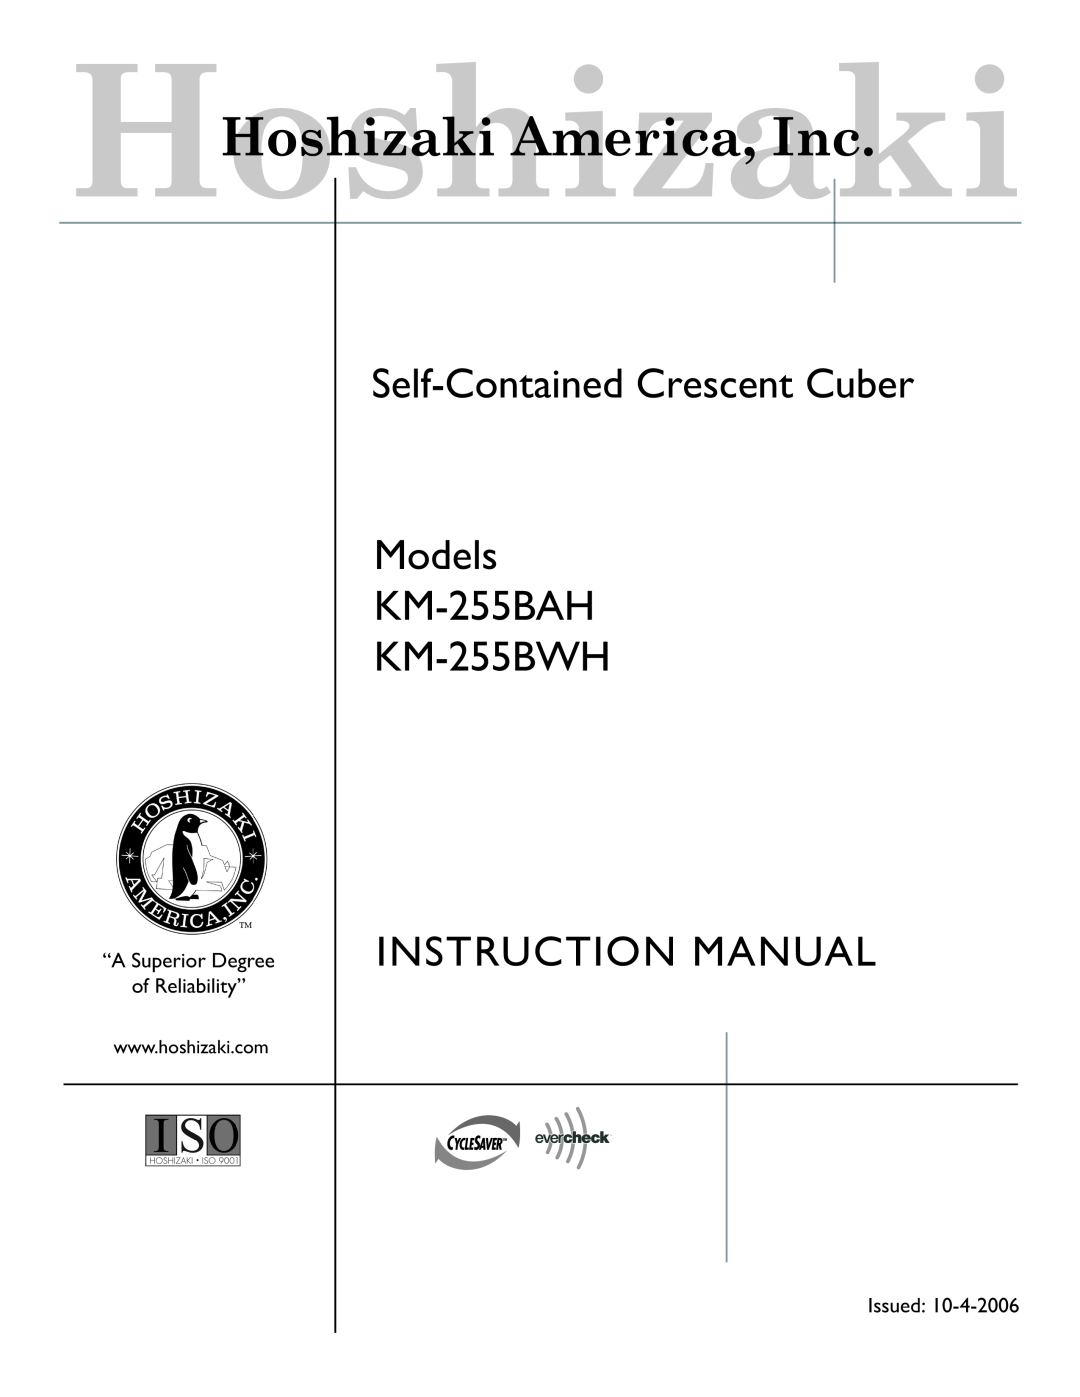 Hoshizaki instruction manual Self-Contained Crescent Cuber Models KM-255BAH KM-255BWH, Instruction Manual, Issued 